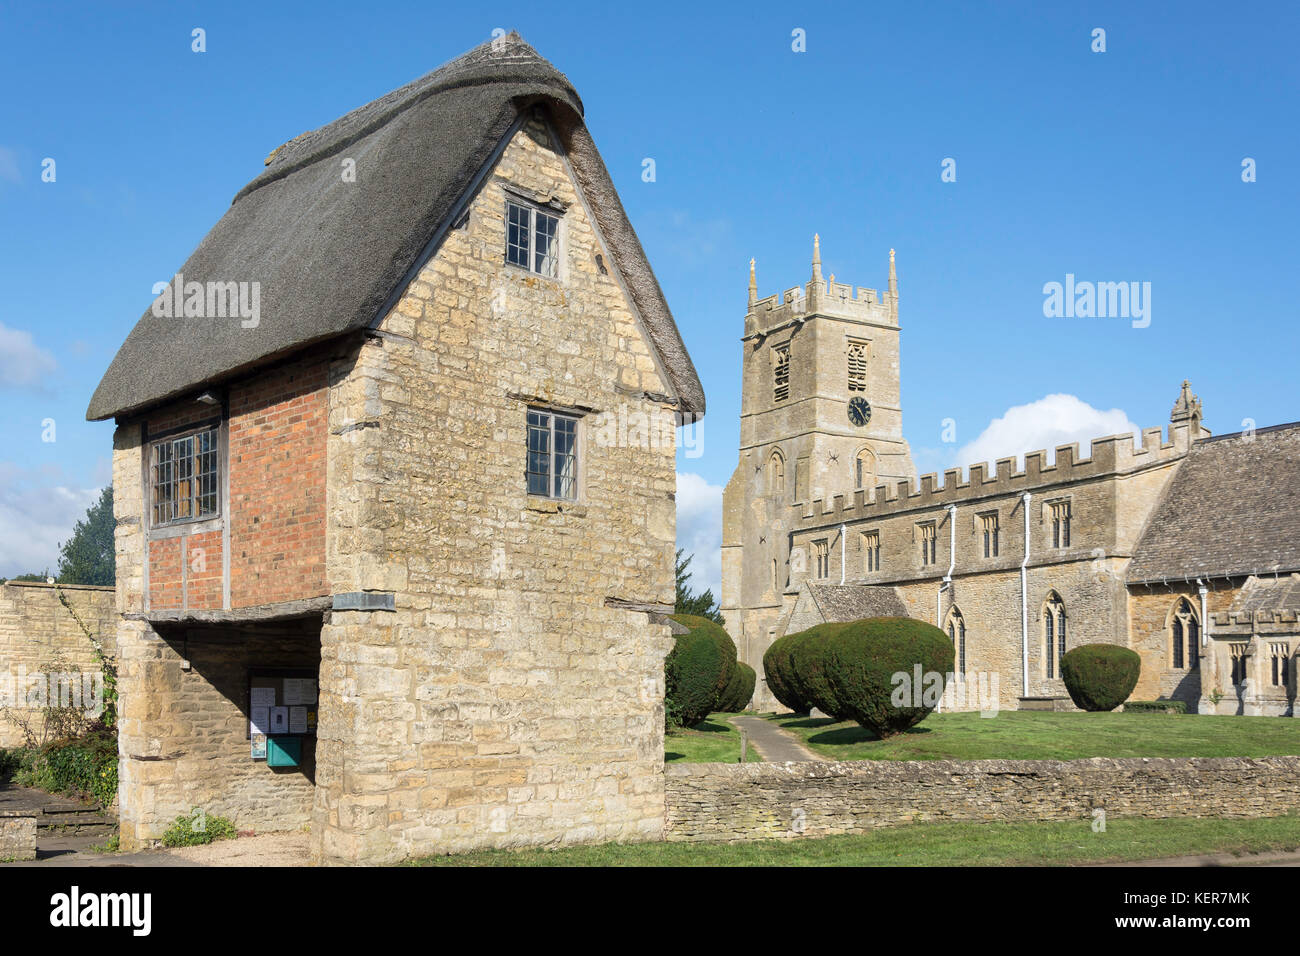 St Peter & St Paul Church showing The Lych Gate, Main Street, Long Compton, Warwickshire, England, United Kingdom Stock Photo